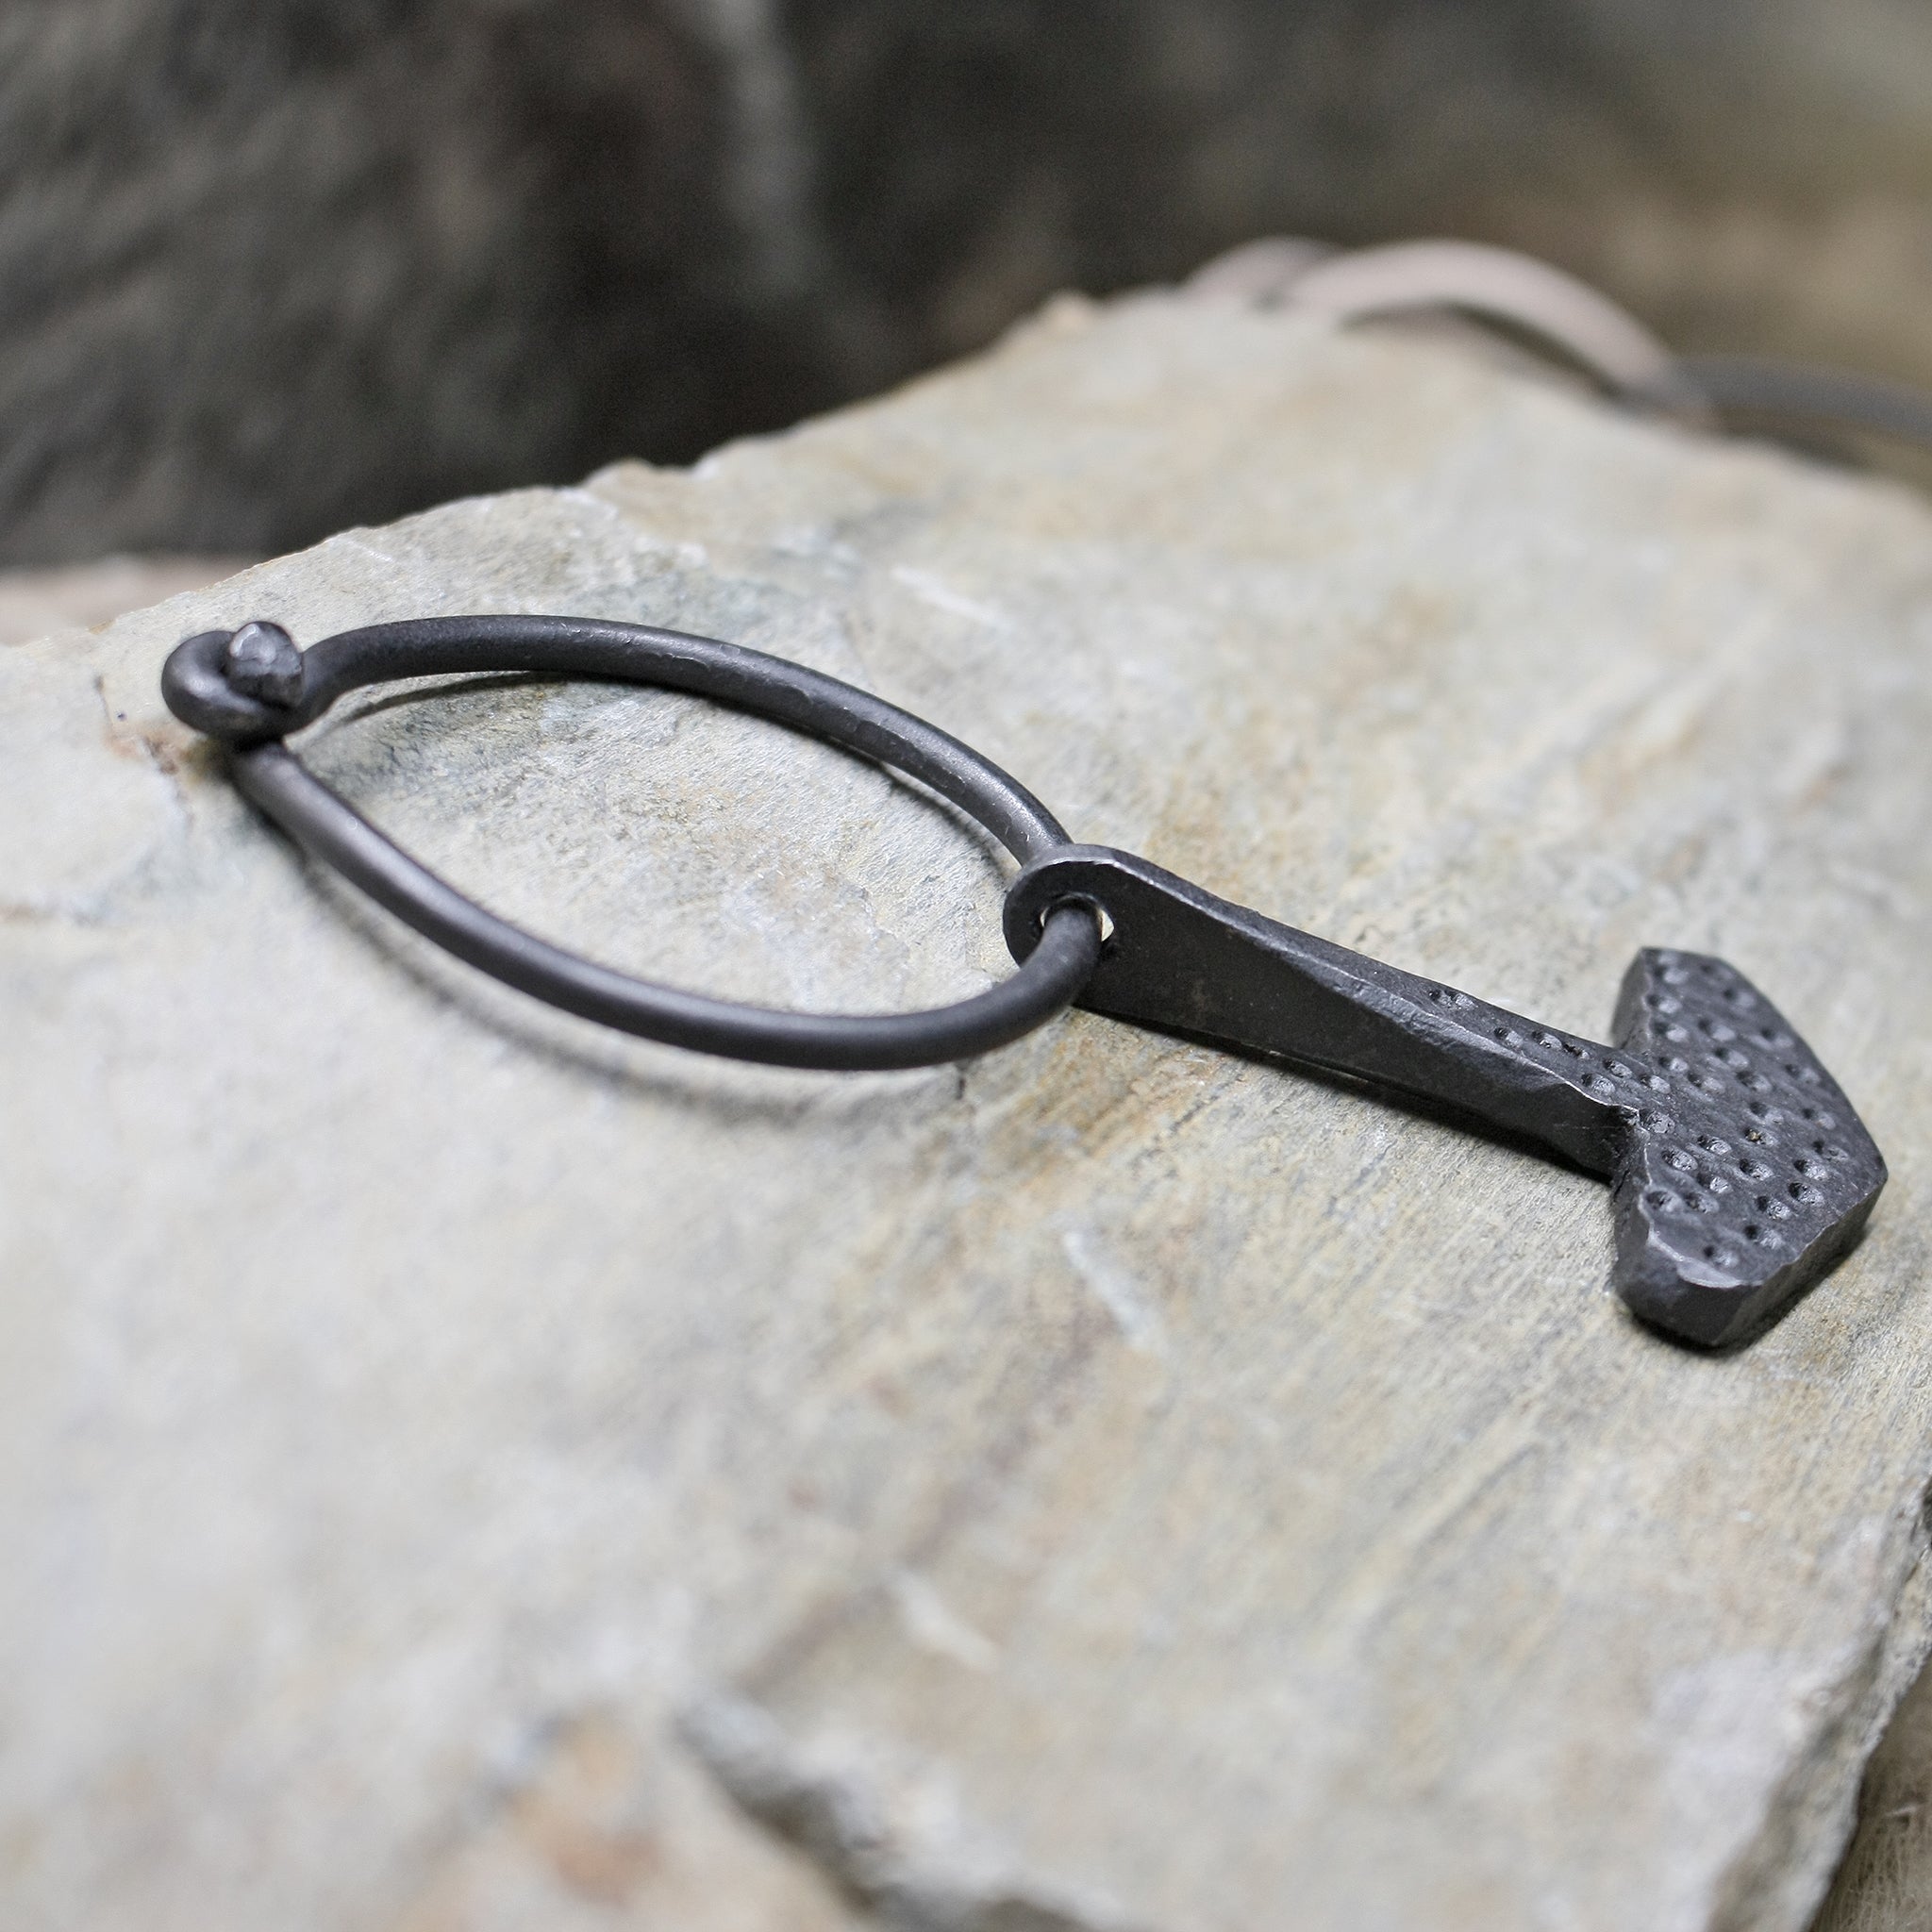 Embossed Iron Thors Hammer Replica Pendant on Ring on Rock - Side View